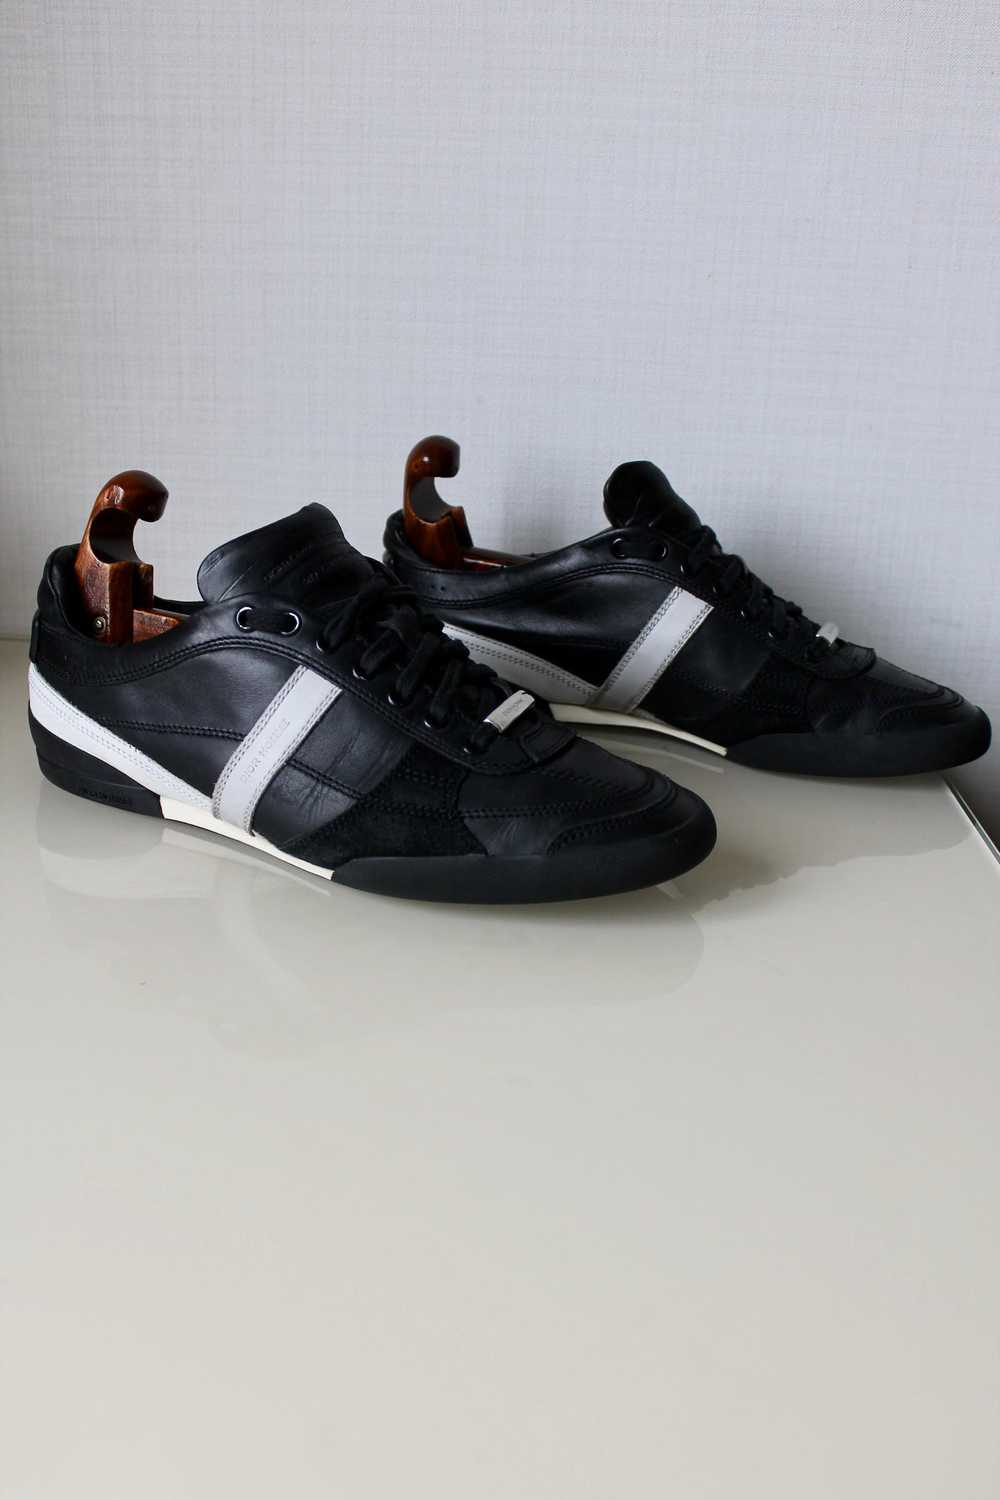 Dior DIOR HOMME Leather Low Top Sneakers Black - image 1